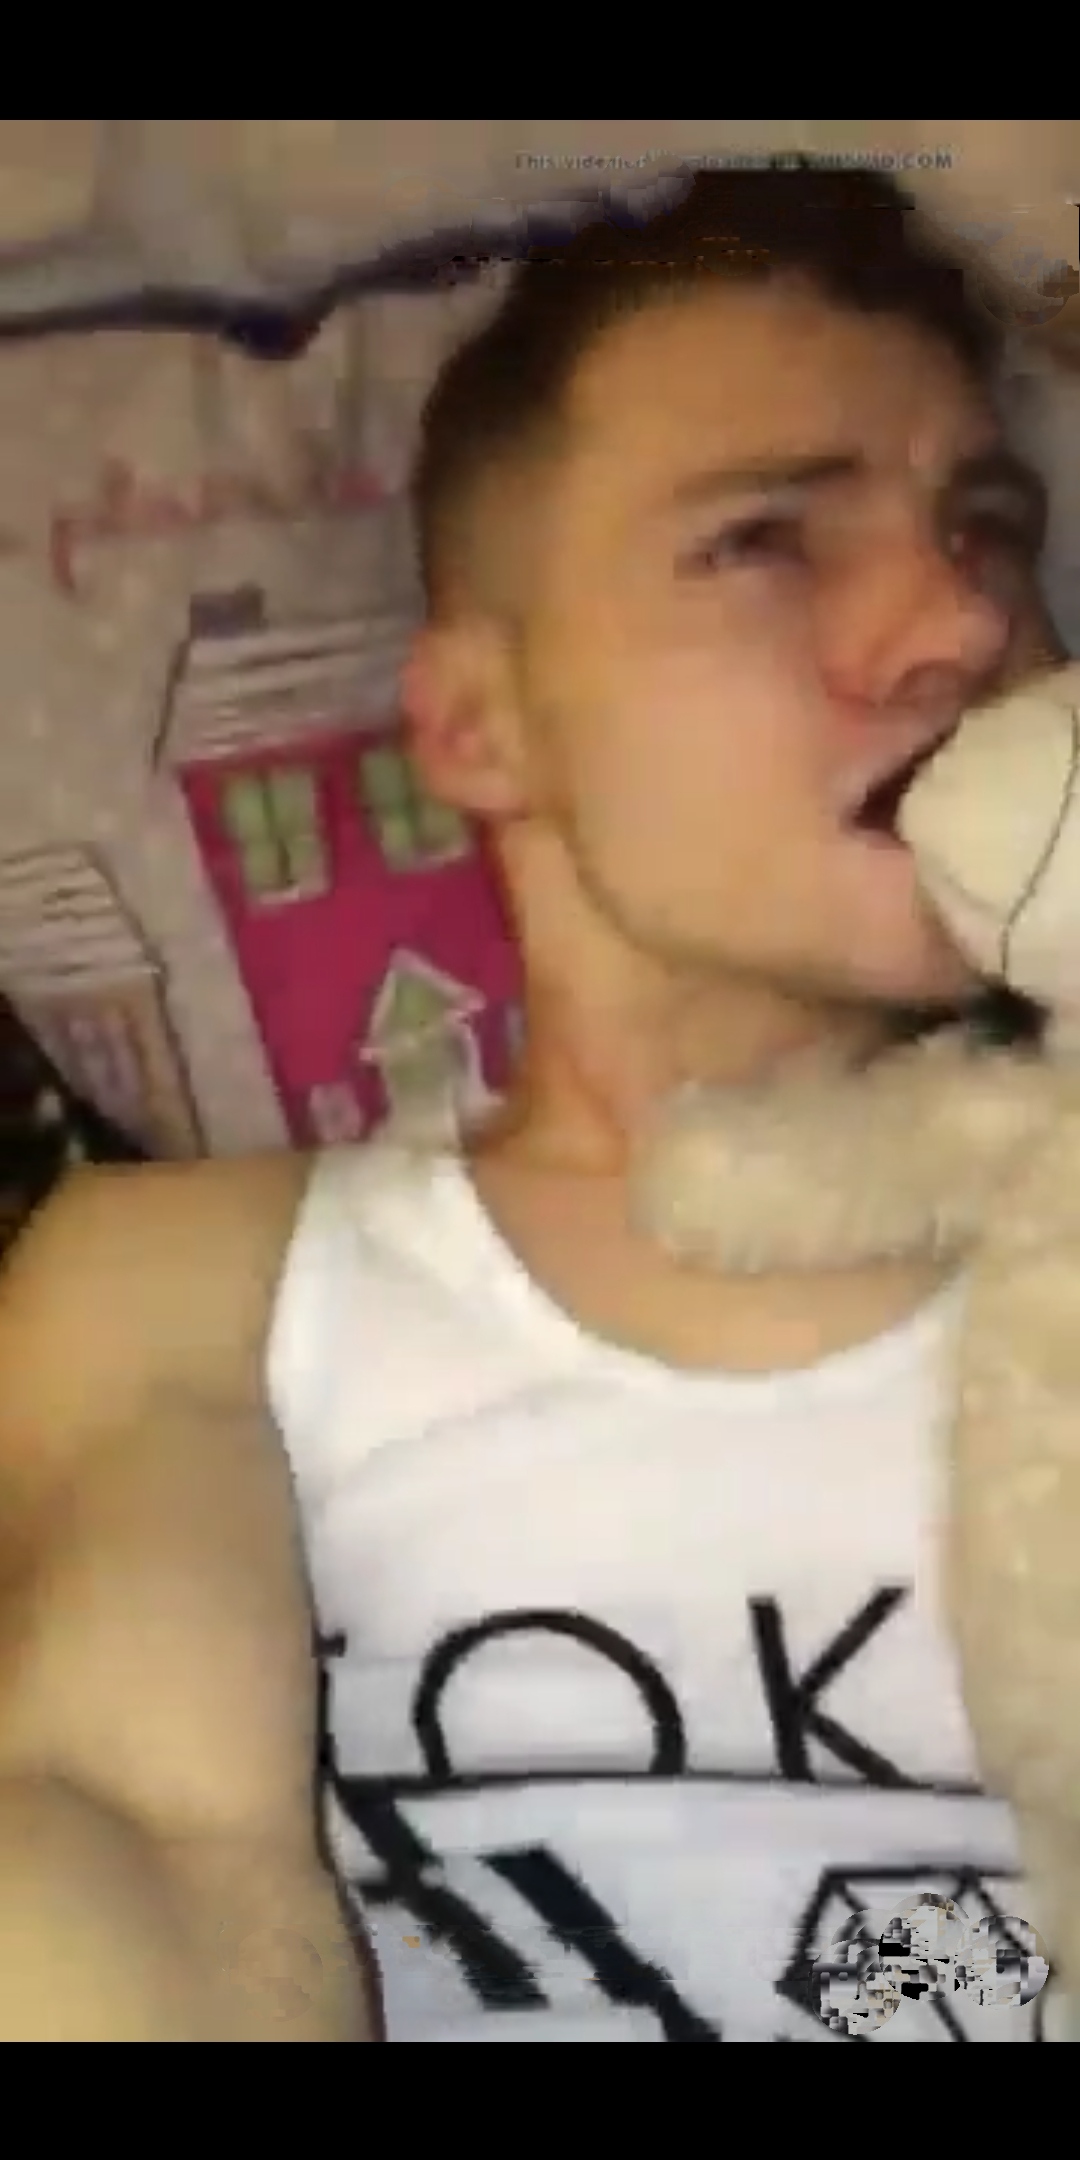 Faggot gets her cunt fucked while clutching her teddy